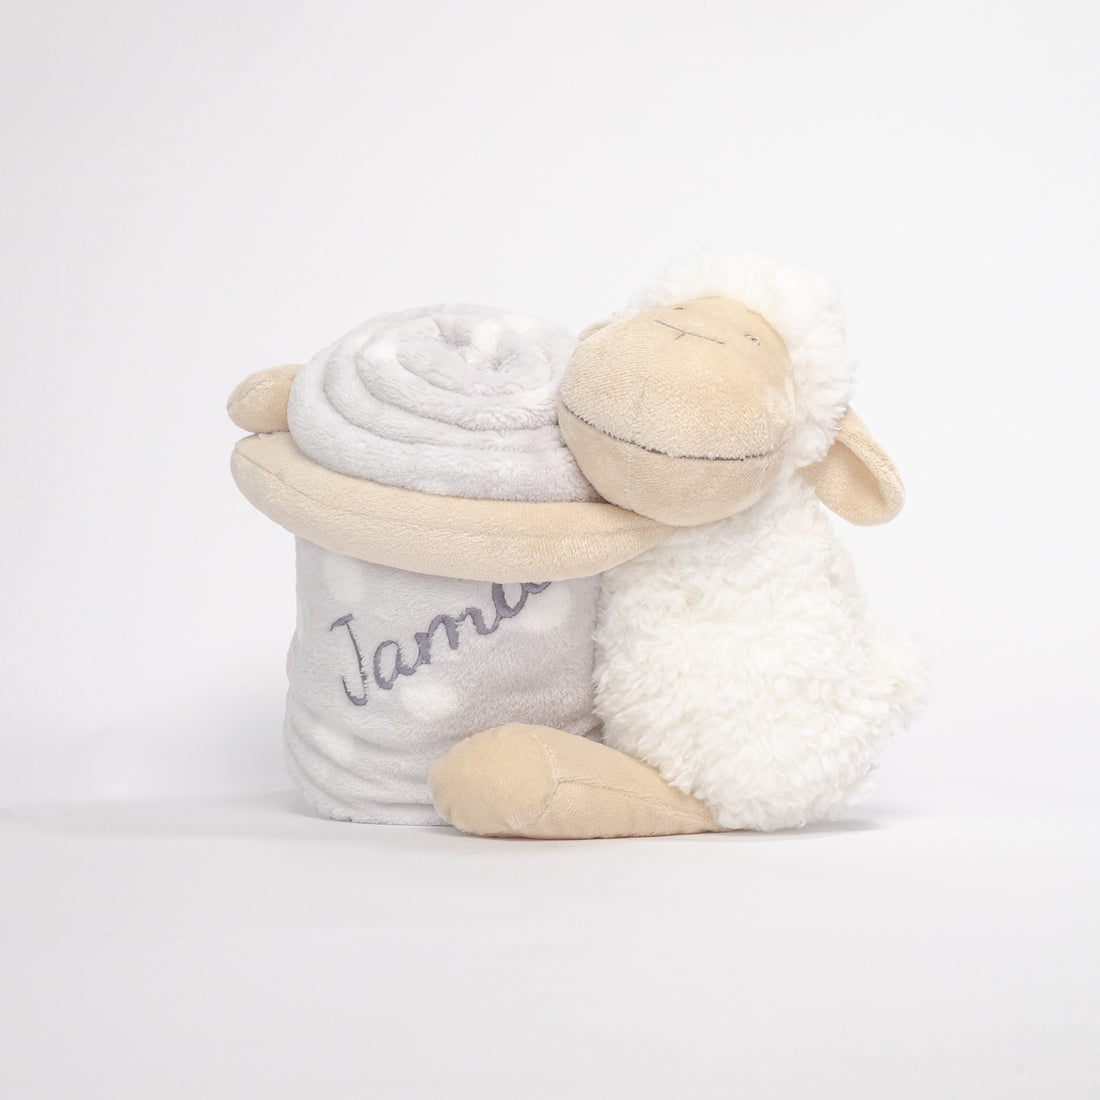 Roll-up sheep design blanket with plush sheep hugging the rolled blanket to keep it in place. The blanket features an embroidered baby&